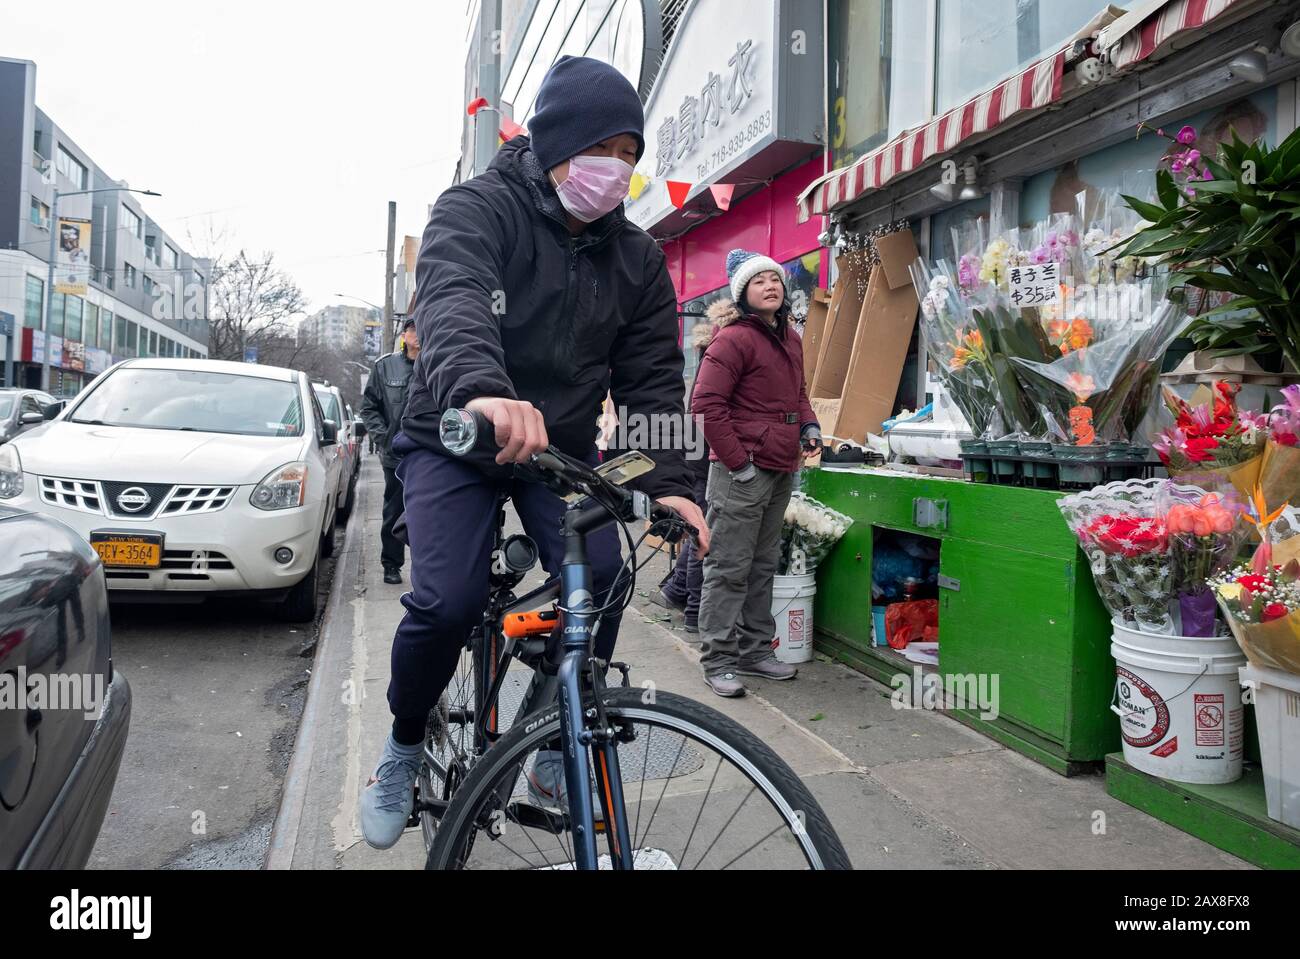 A Chinese American man wearing a surgical mask rides his bike on the sidewalk in Chinatown, Flushing, New York City. Stock Photo